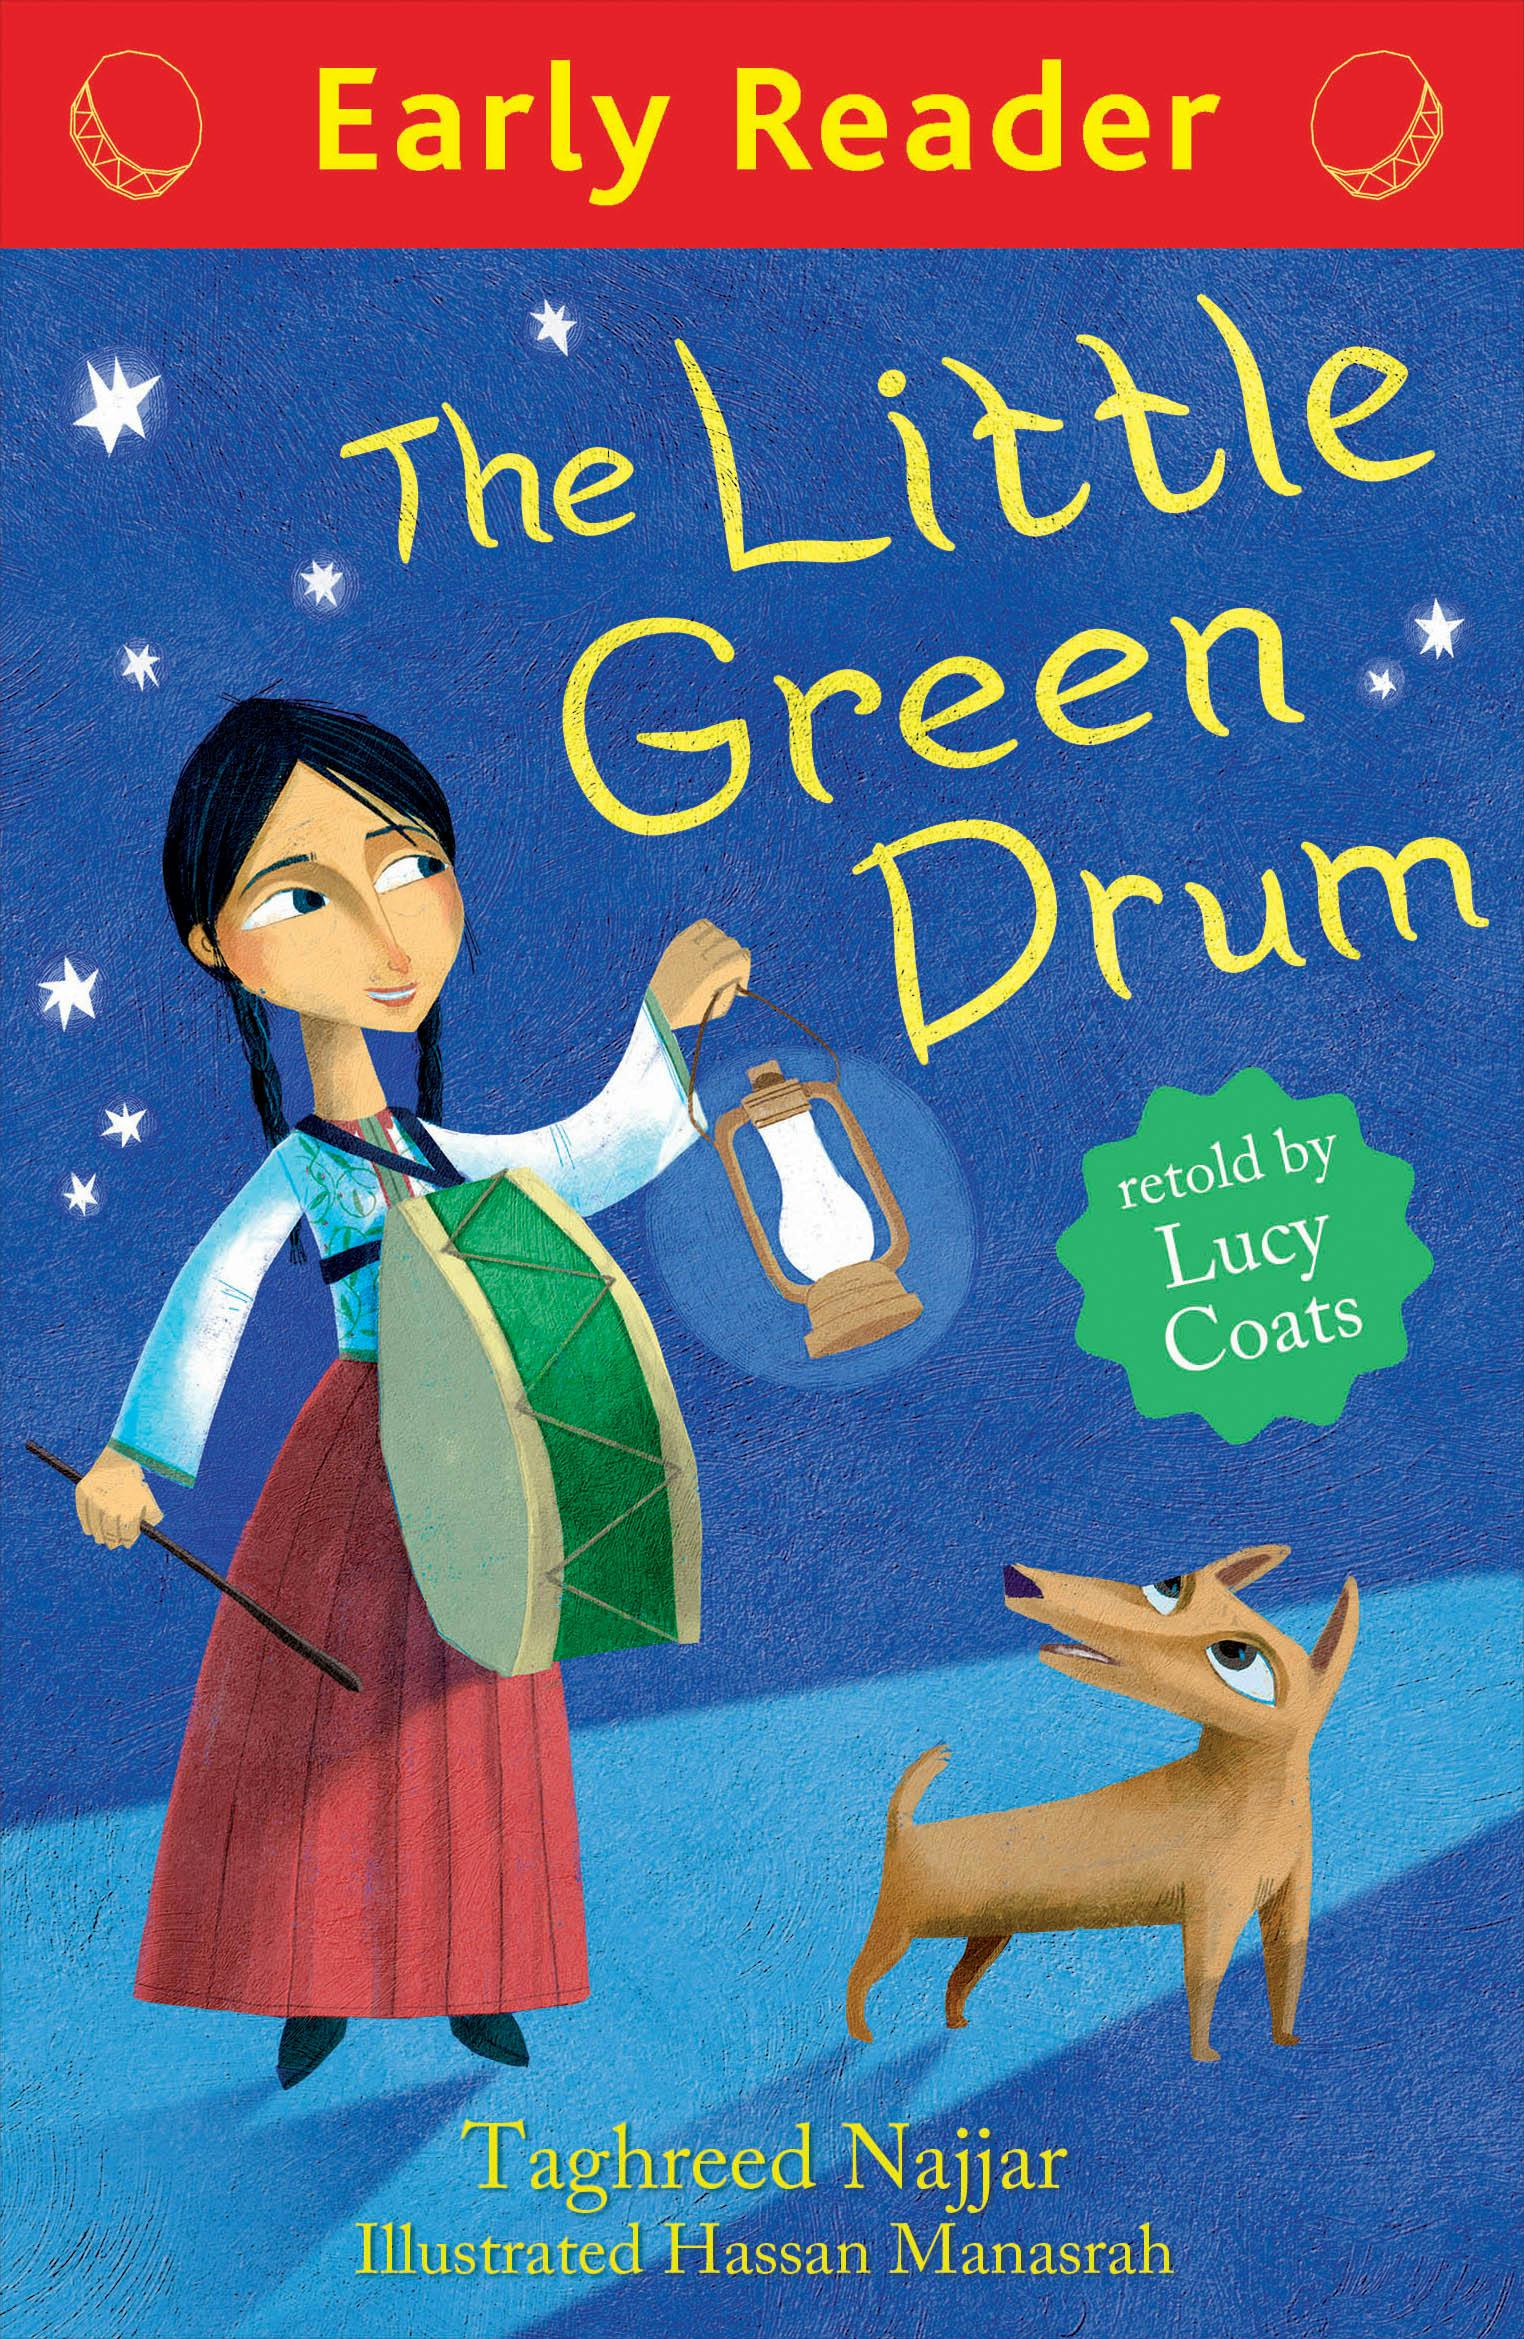 Cover for The Little Green Drum featuring an illustration of a young girl wearing a drum on her chest and holding a drumstick to hit it with in one hand and a lantern in the other with a dog by her side on a blue background with stars in the sky.